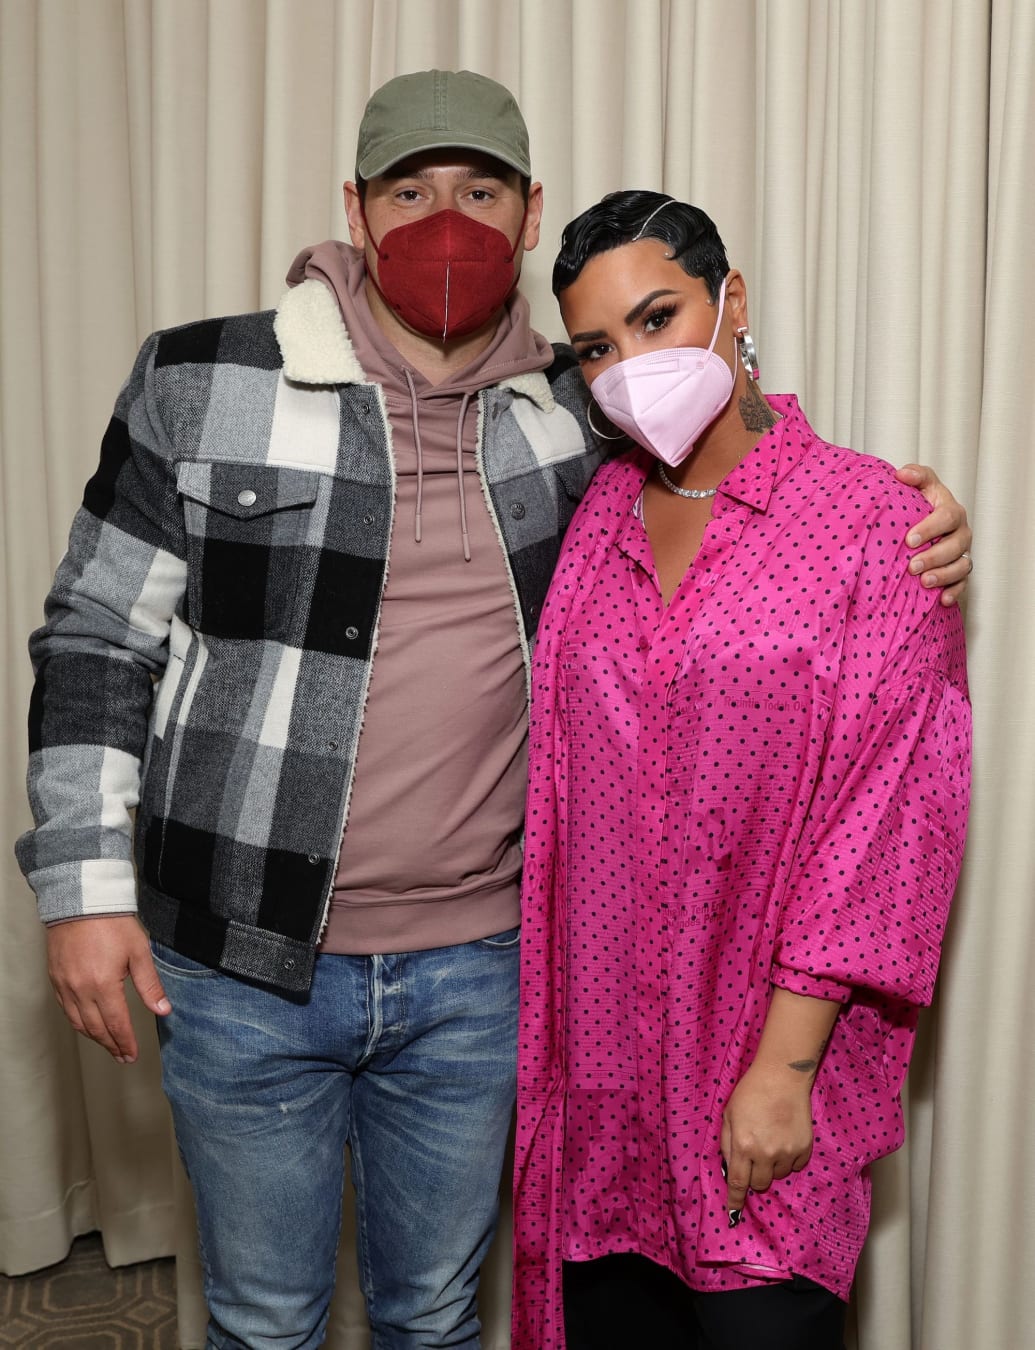 Scooter Braun and Demi Lovato at the premiere of "Demi Lovato: Dancing With the Devil" in 2021